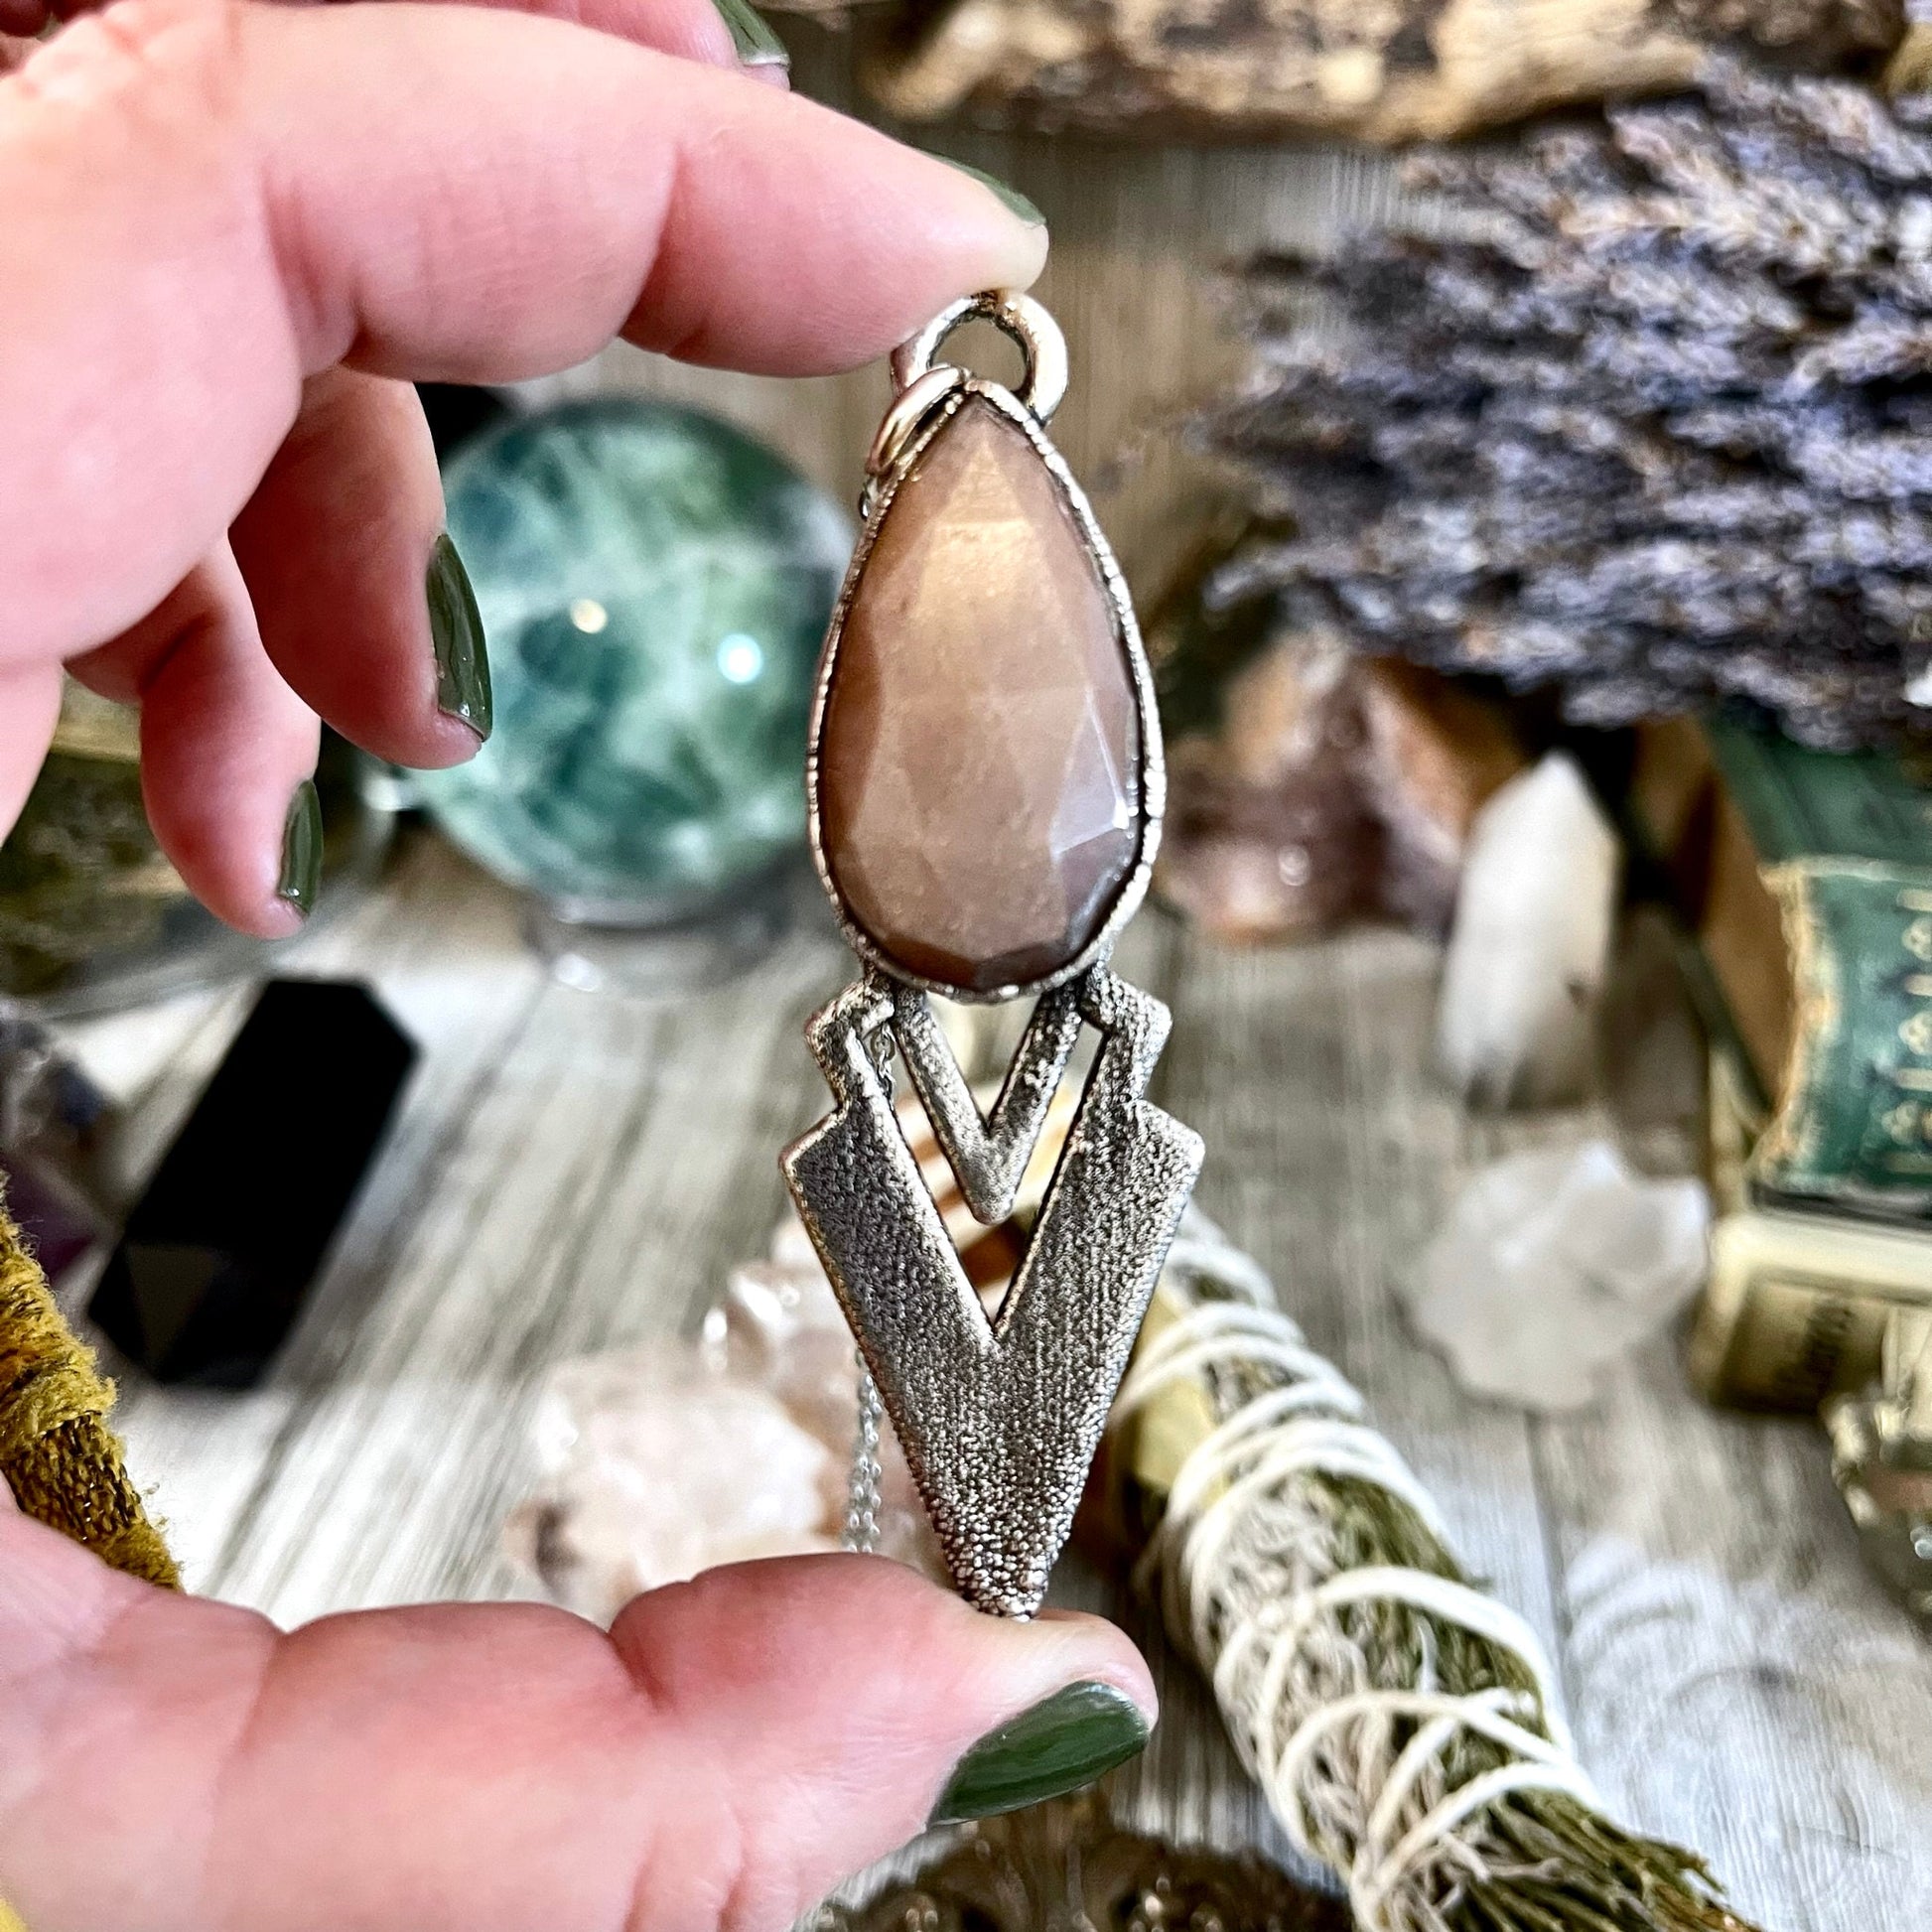 Big Crystal Necklace, Big Stone Necklace, Bohemian Jewelry, Crystal Necklaces, Etsy ID: 1620635164, Foxlark Alchemy, FOXLARK- NECKLACES, Jewelry, Large Crystal, Large Raw Crystal, layering necklace, Necklaces, peach moonstone, Raw crystal jewelry, raw cry